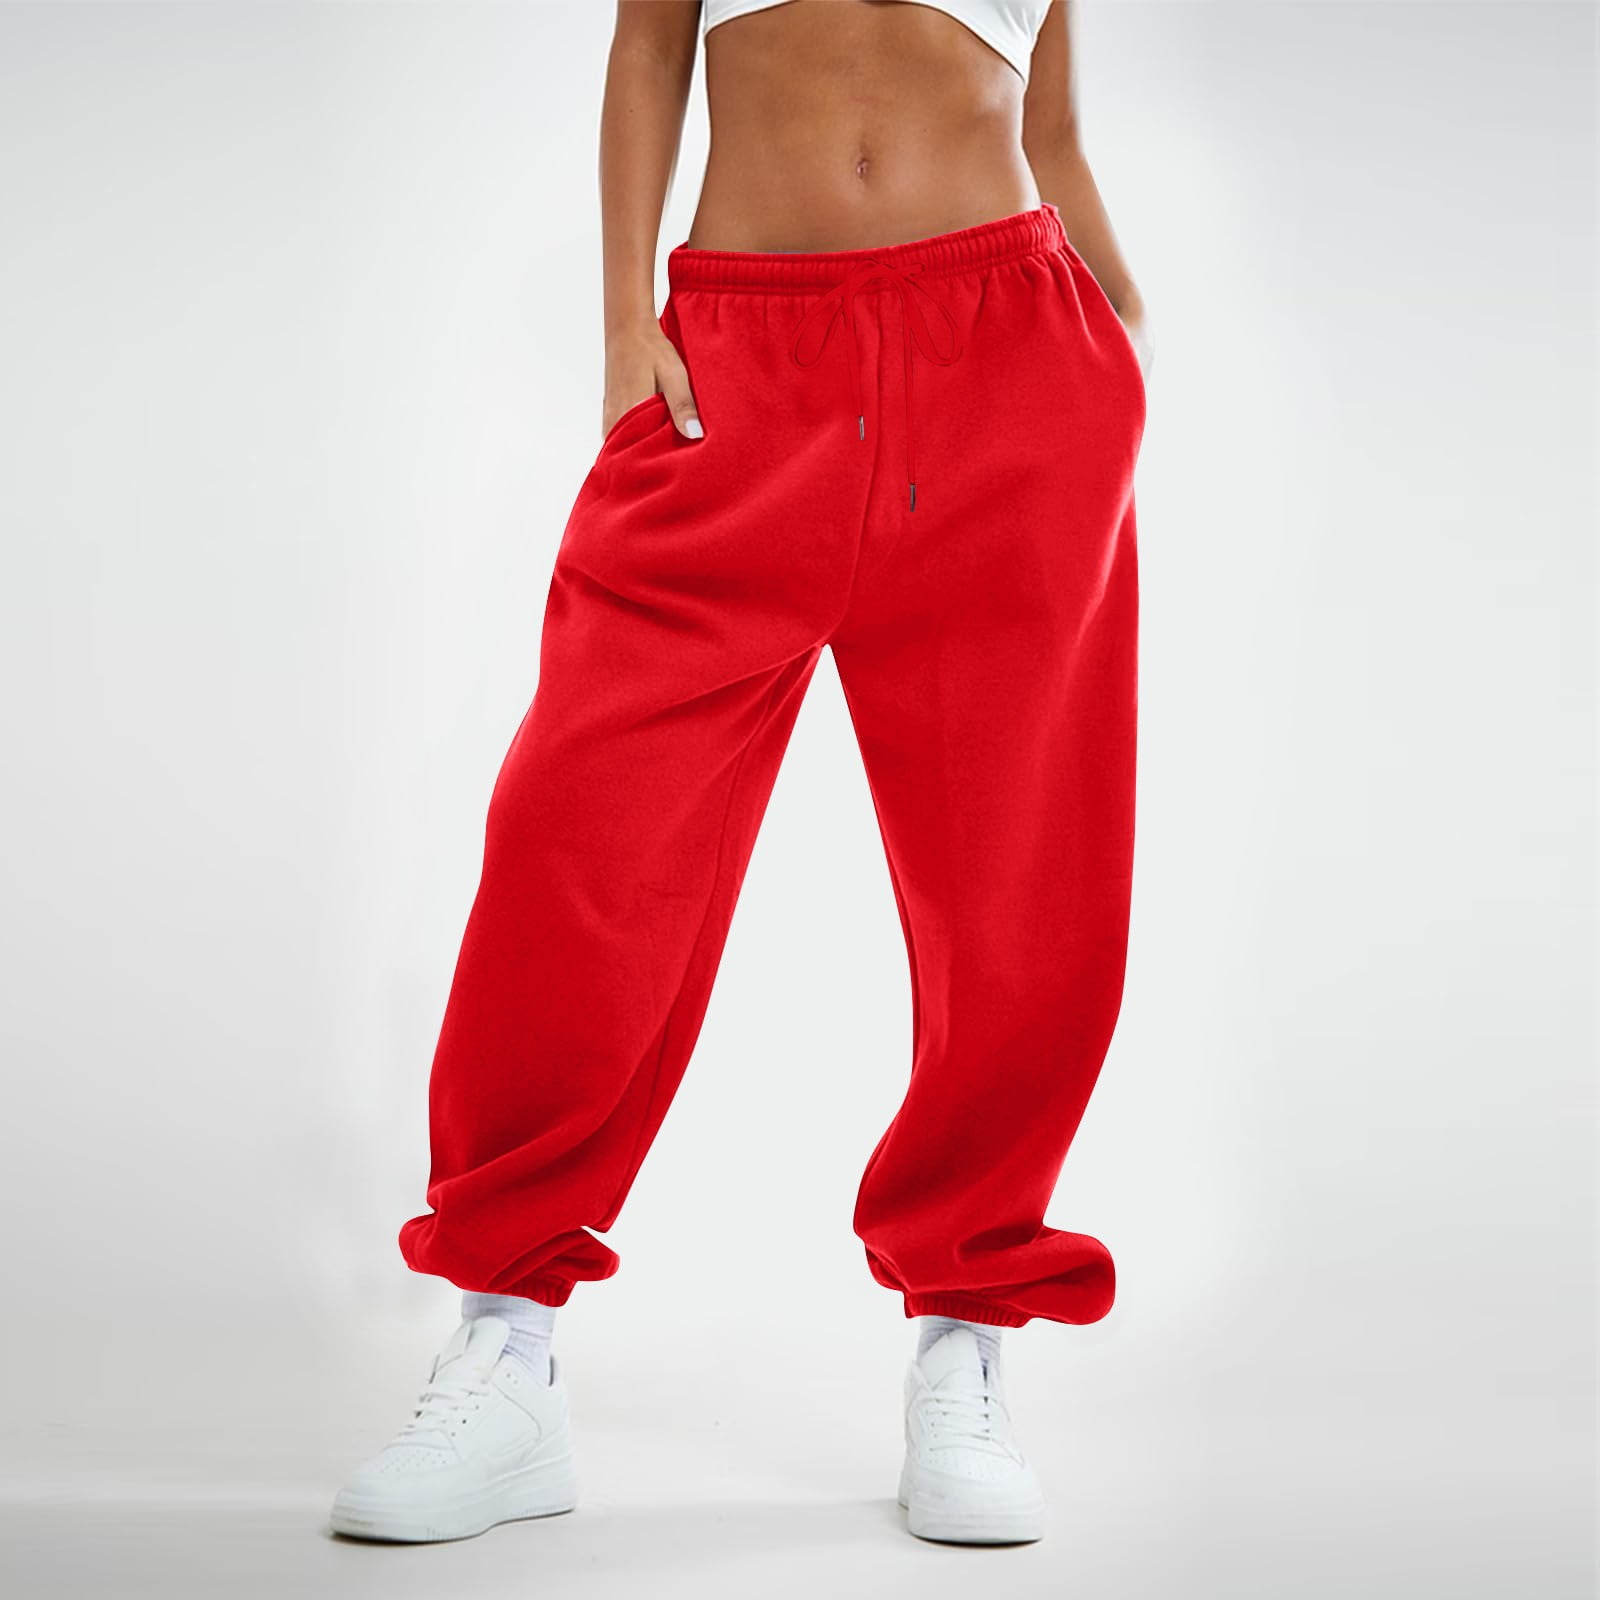 TQWQT Women's Sweatpants Fleece Baggy Casual High Waisted Workout Athletic  Cinch Bottom Comfy Fall Joggers Pants with Pocket Red 5XL 